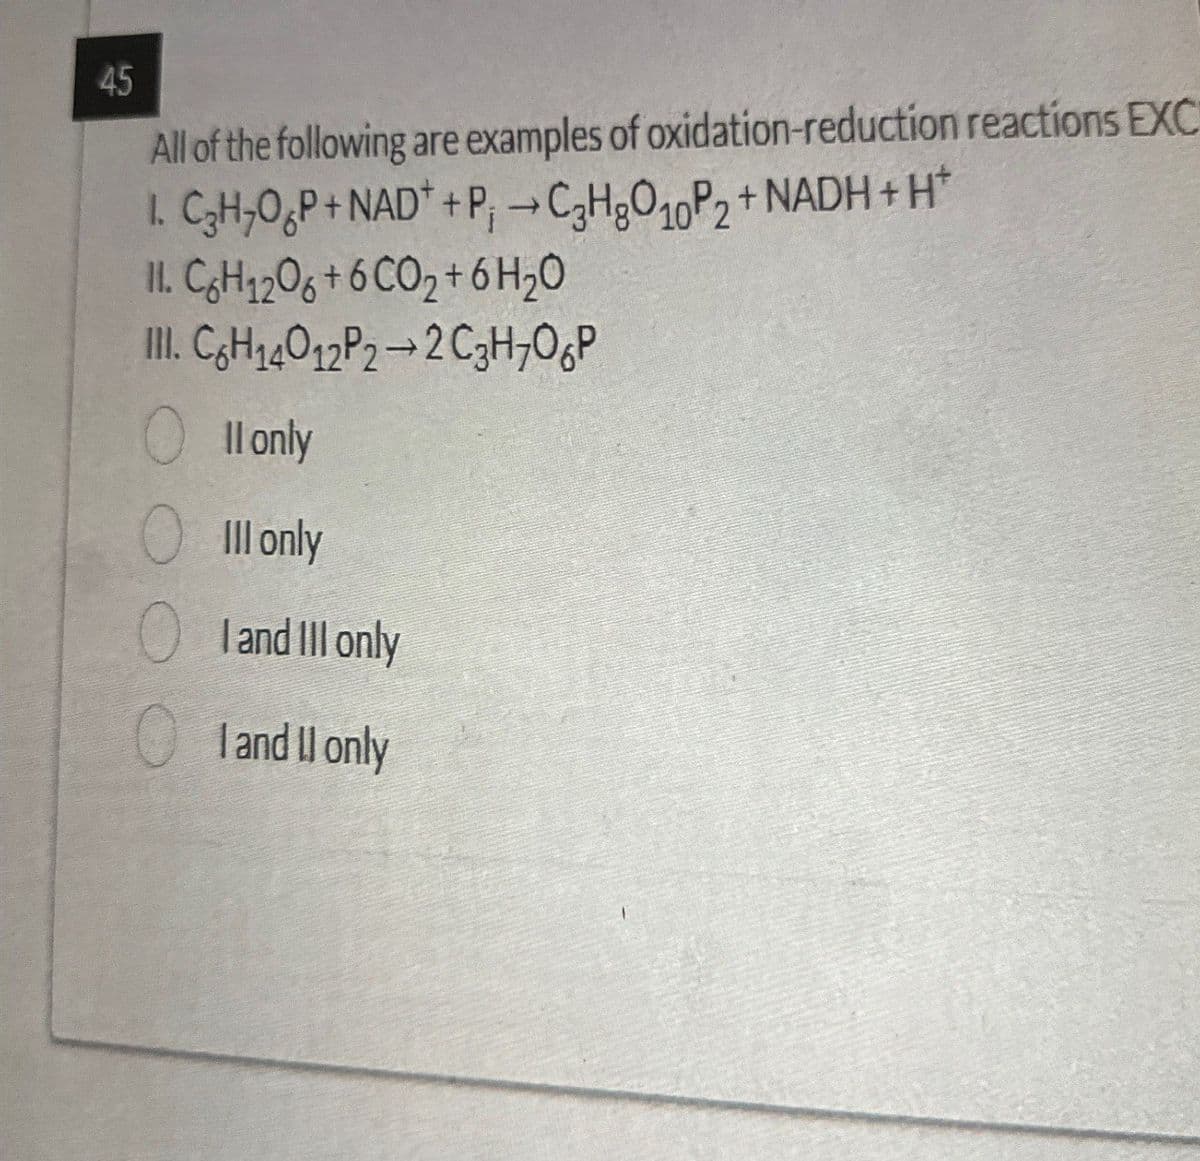 45
All of the following are examples of oxidation-reduction reactions EXC
->
1. C₂H₂OP+NAD++P; C3H8O10P2+ NADH+H
11. C6H12O6+6 CO₂+6H₂O
III. C6H14012P2-2 C3H7OP
Il only
● Ill only
I and III only
I and II only